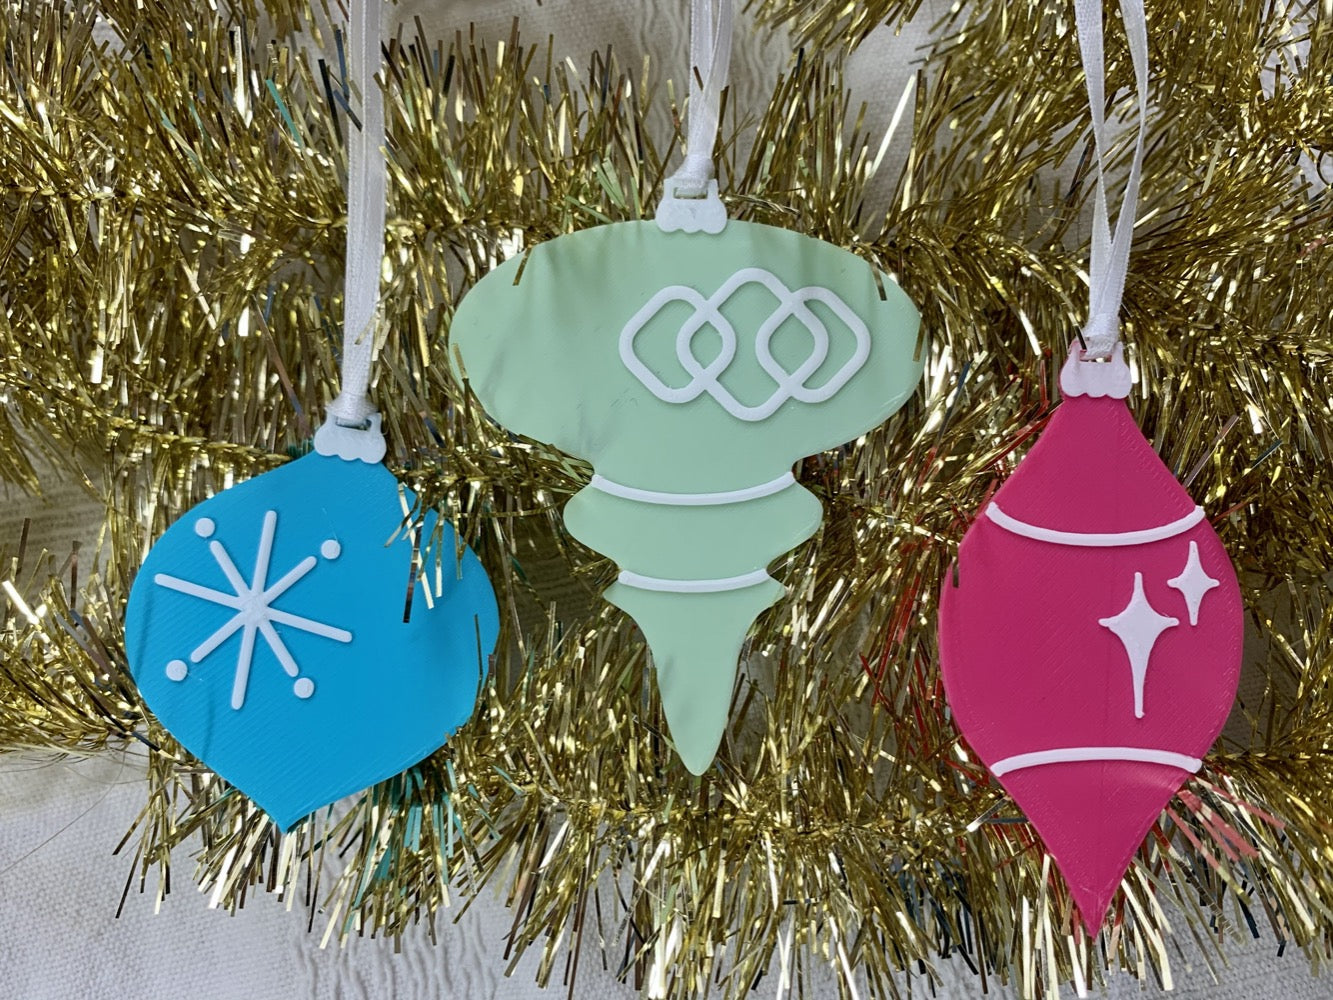 On a gold tinsel garland background are a set of 3 R+D 3D printed ornaments. They are all designed to look like vintage baubles that would have commonly been found on Christmas trees in the past. They each have white accents of stars and shapes. One is hot pink, one is mint green, and one is teal.